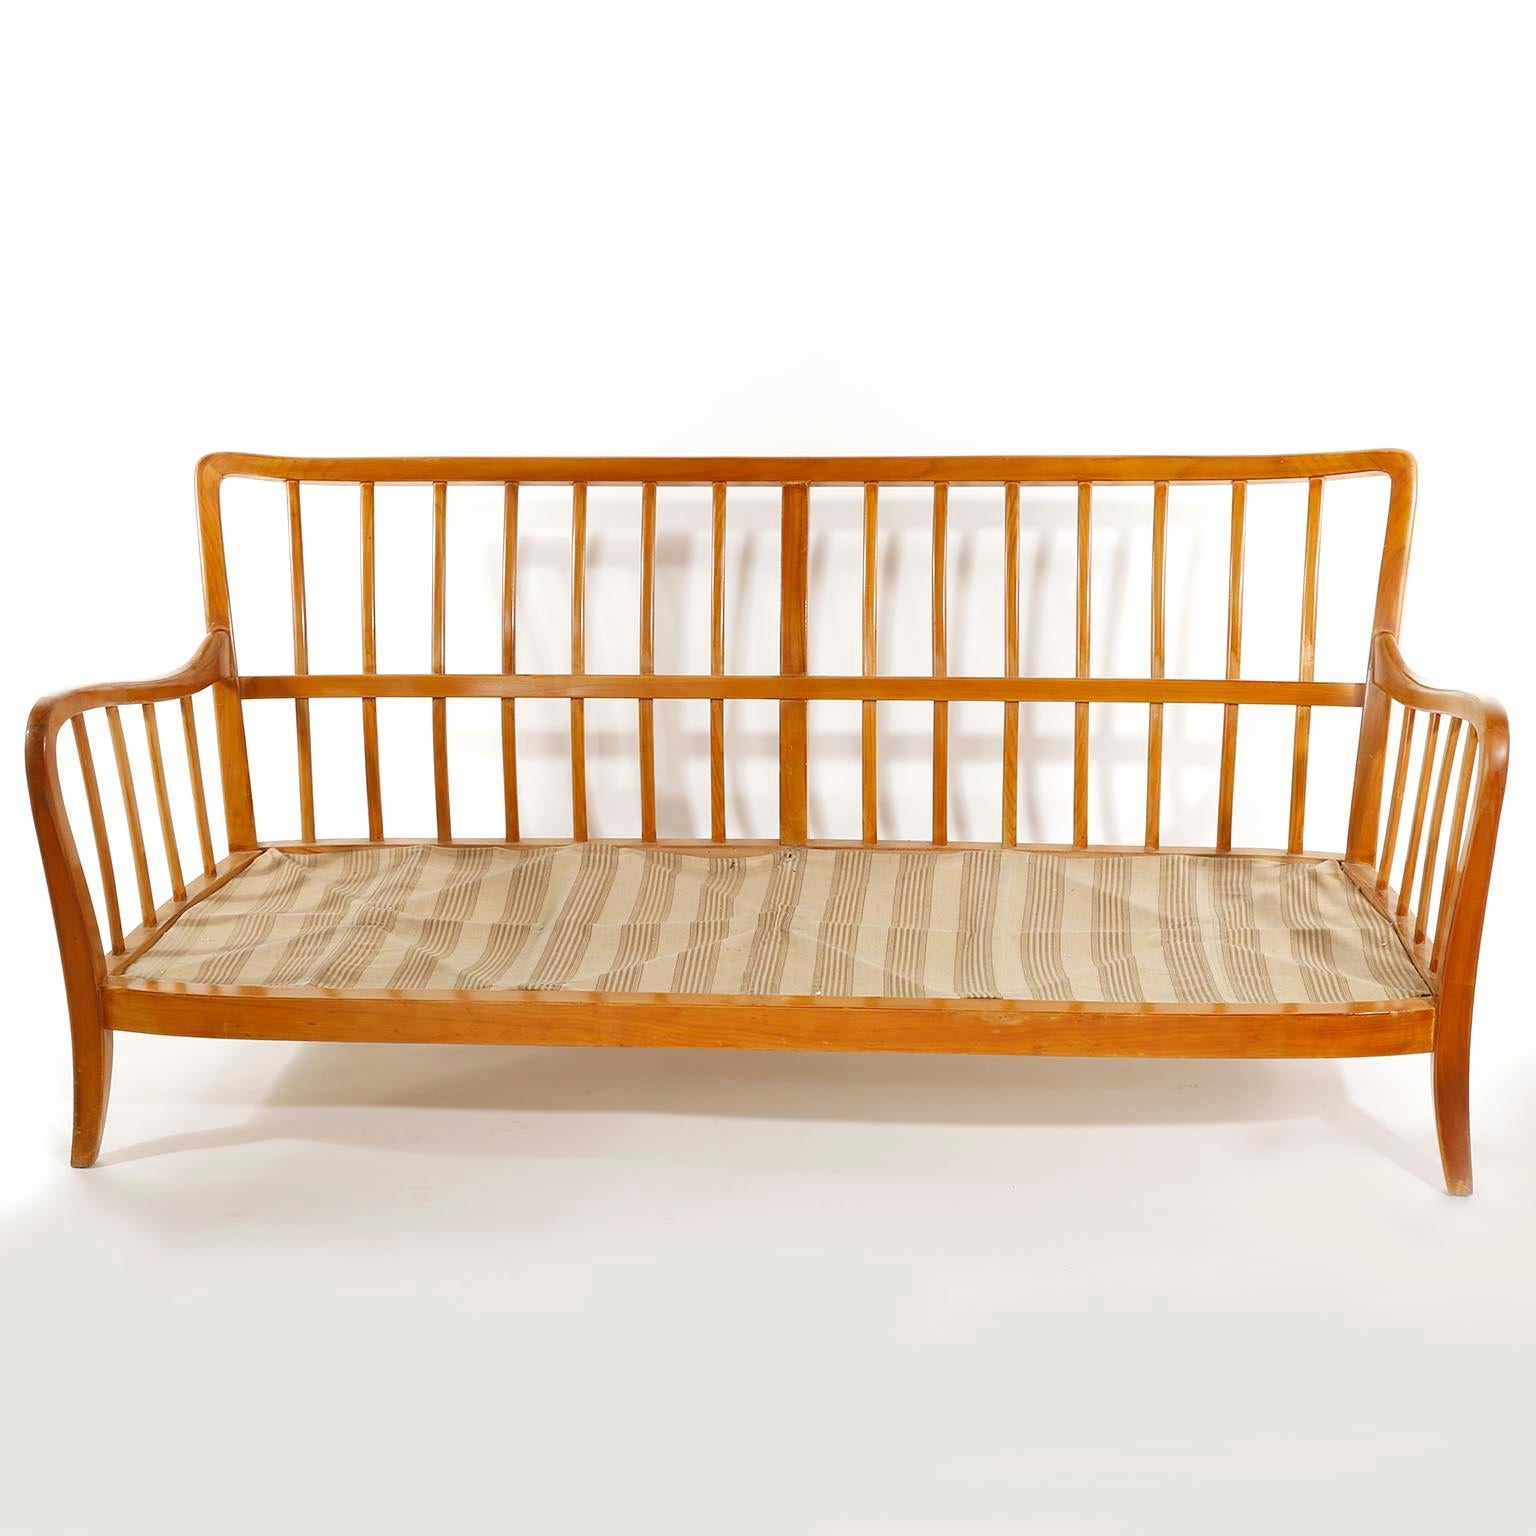 Fabric Bench Seette Seat by Thonet, Attributed to Josef Frank, Wood, 1940 For Sale